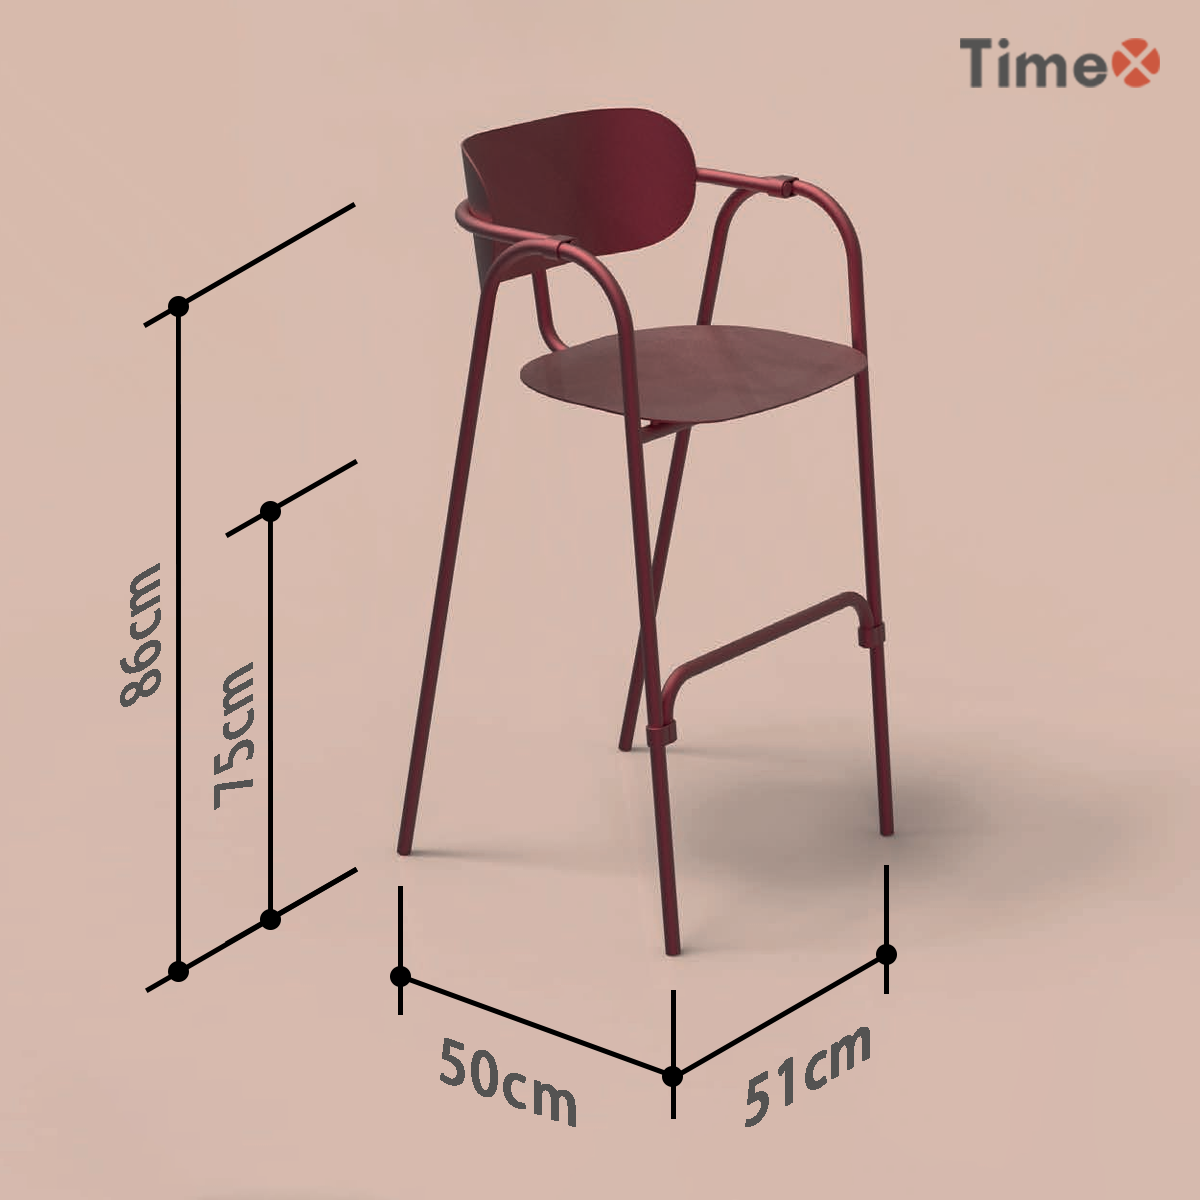 Dimension drawing of design metal chair wholesale